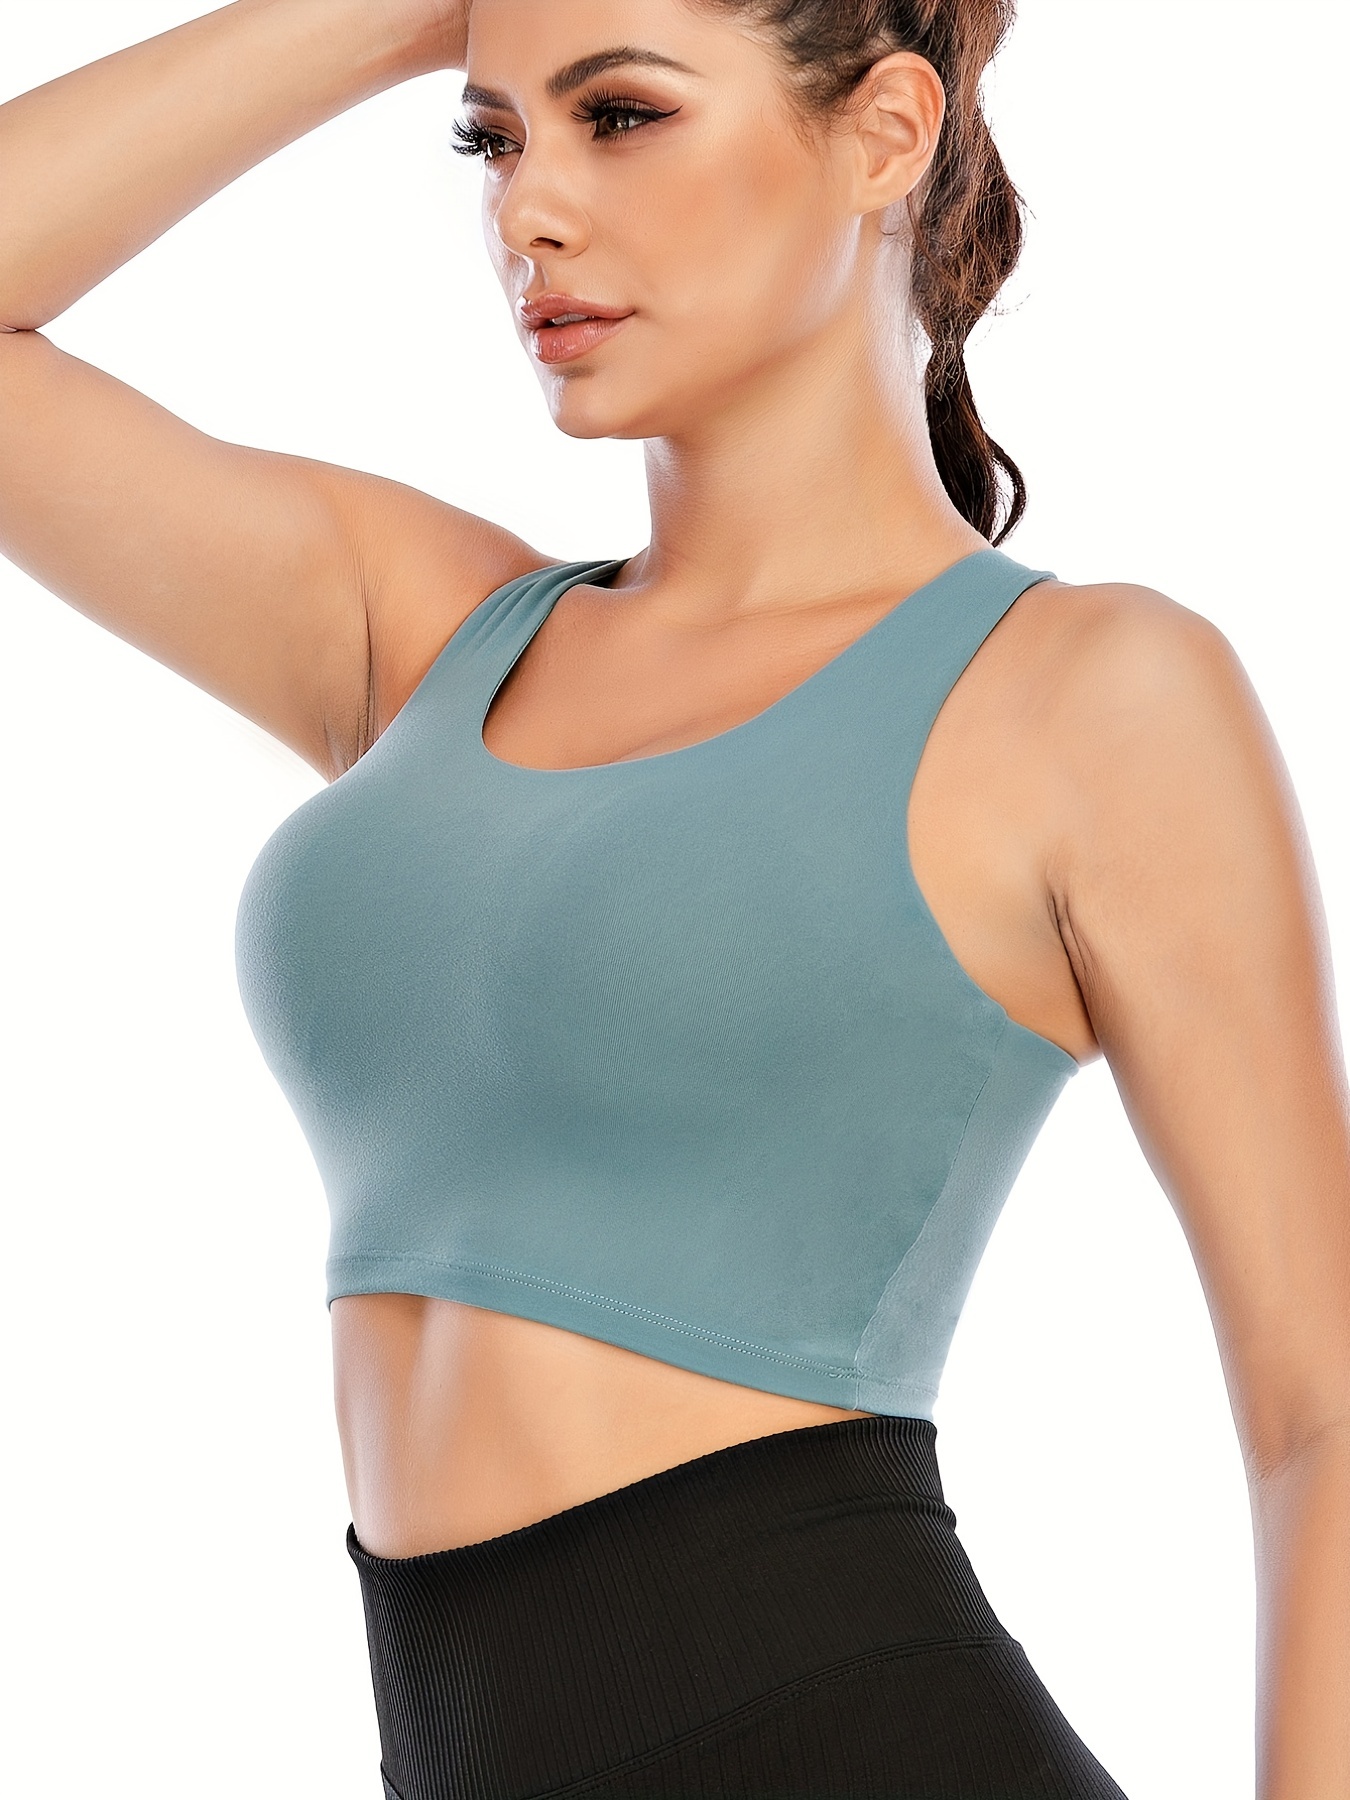  High Neck Sports Bra For Women Longline Full Coverage Sports  Bras Medium Impact Padded Workout Crop Tops For Yoga Gym